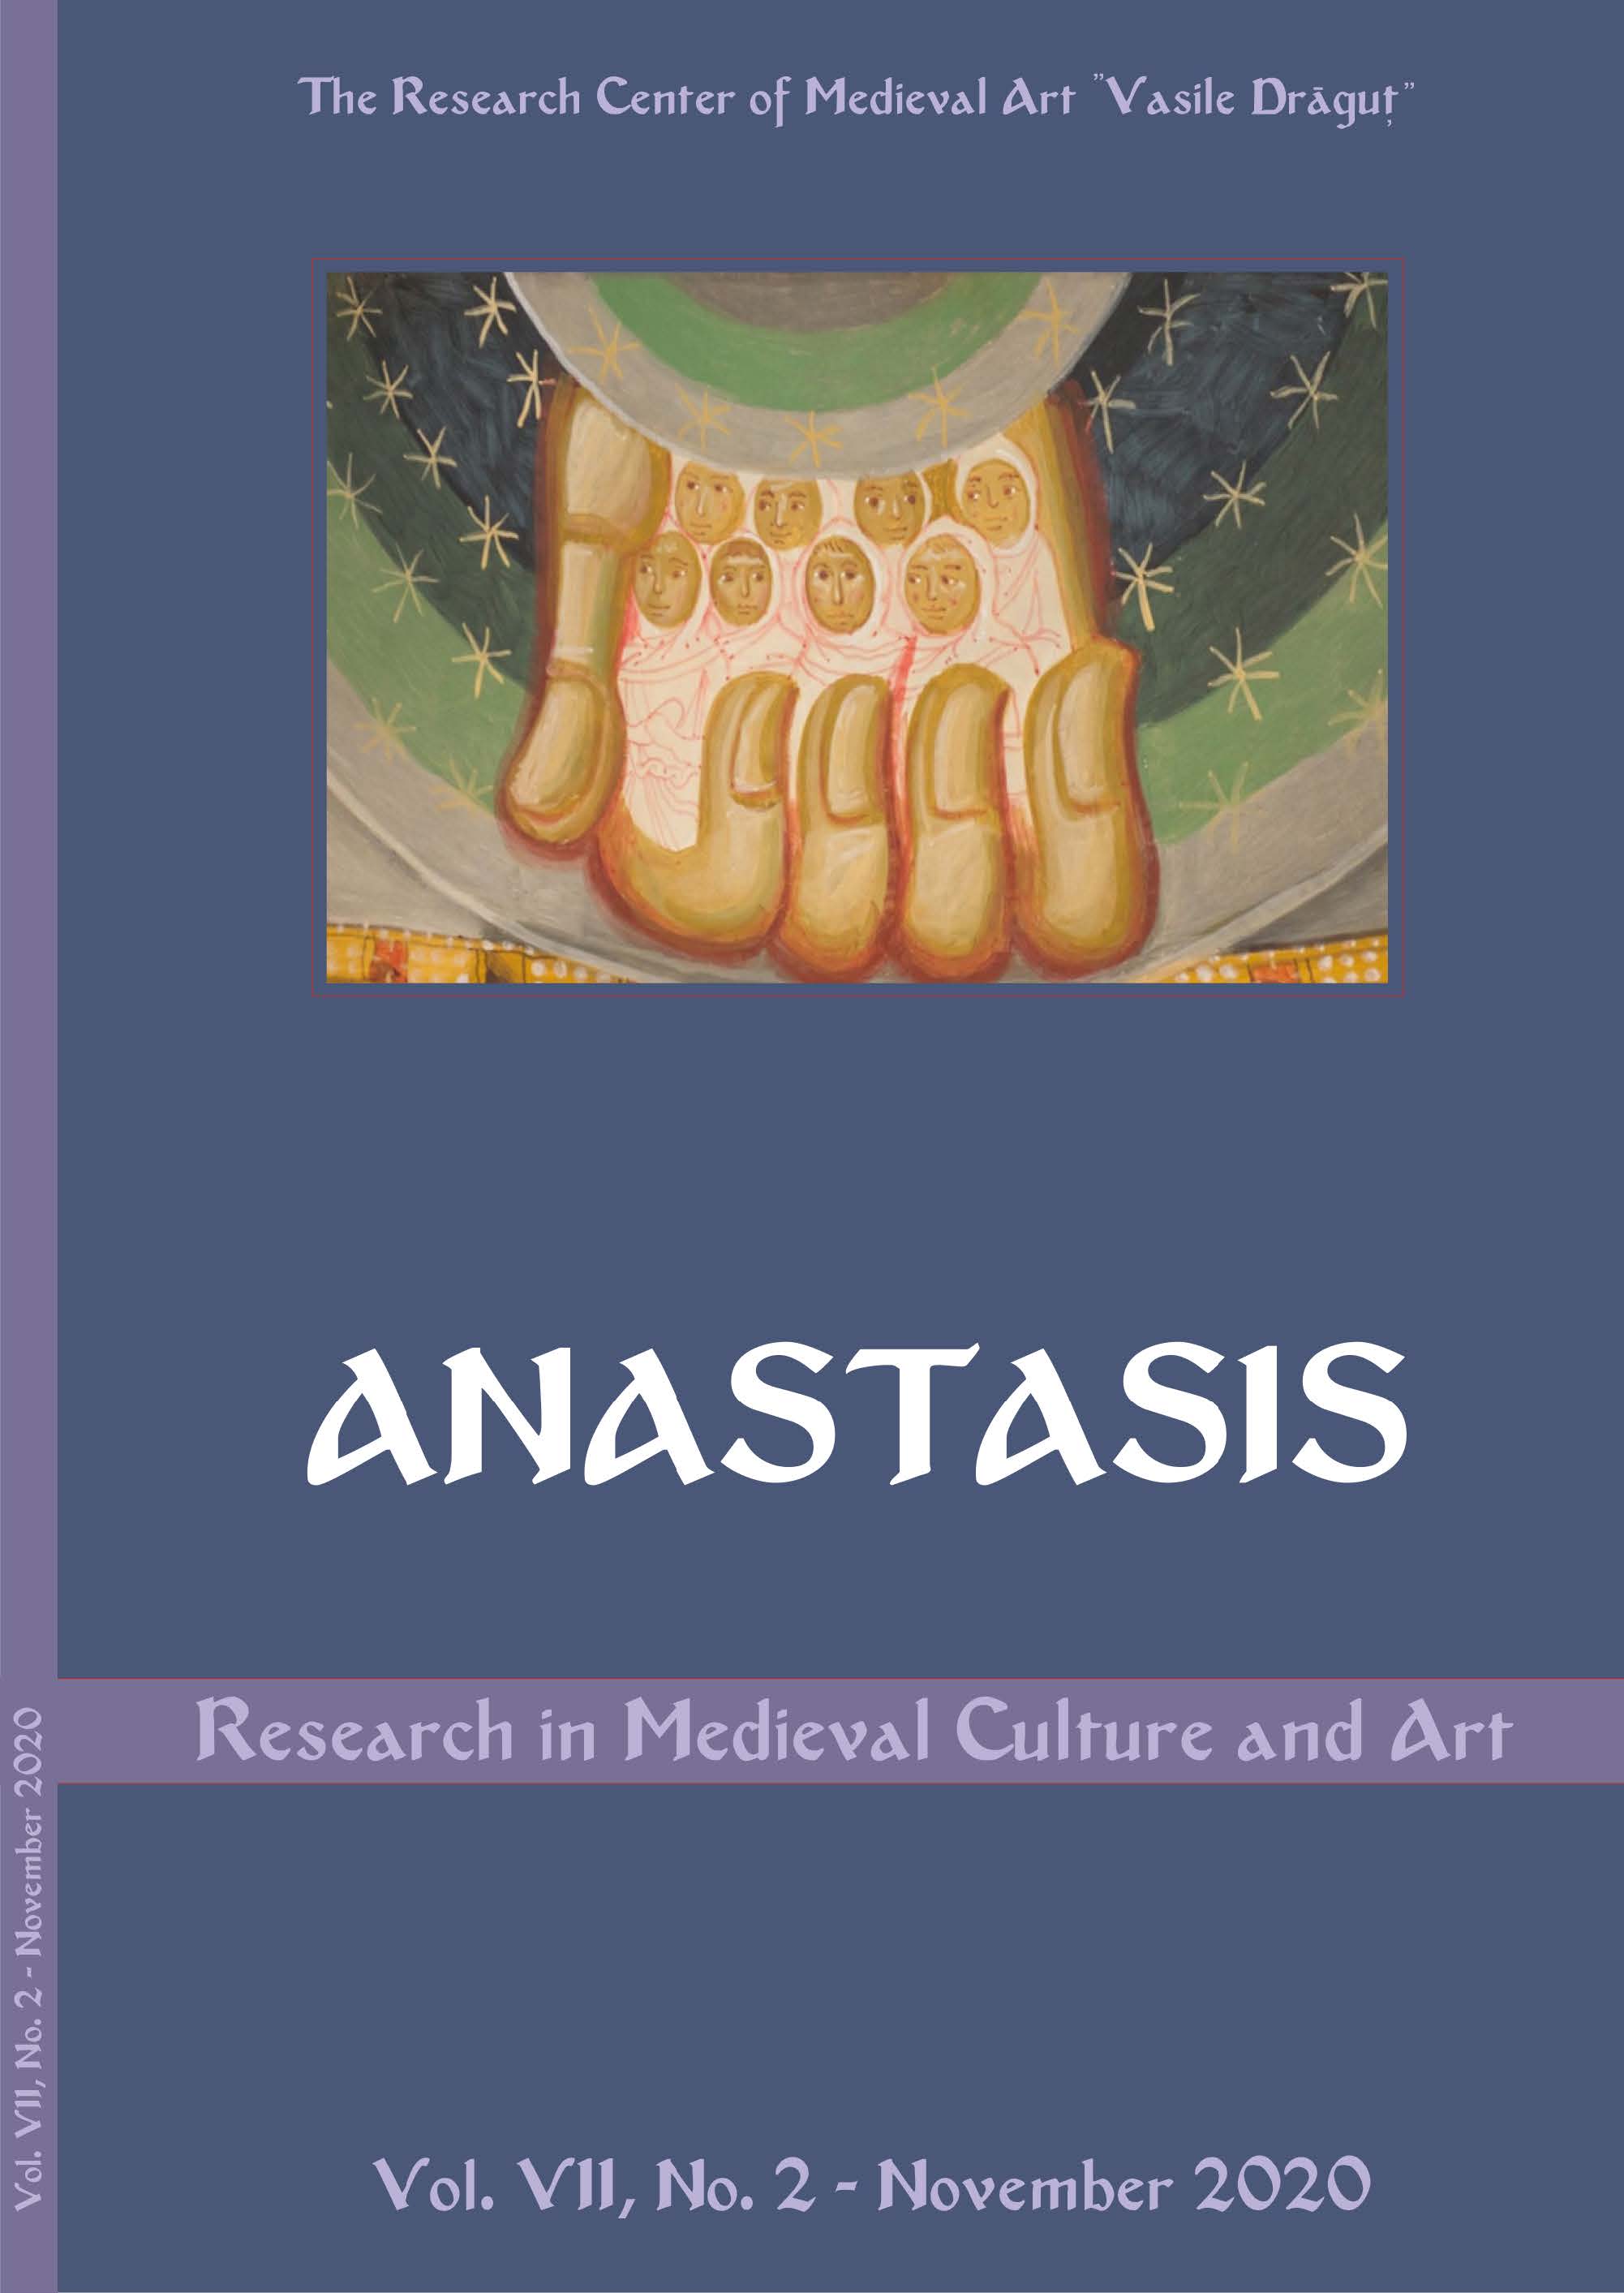 Zoomorphic Images and Ornaments with Rosettes in Christian Art of the Caucasus: Formation Paths of the Traditional Schemes Cover Image